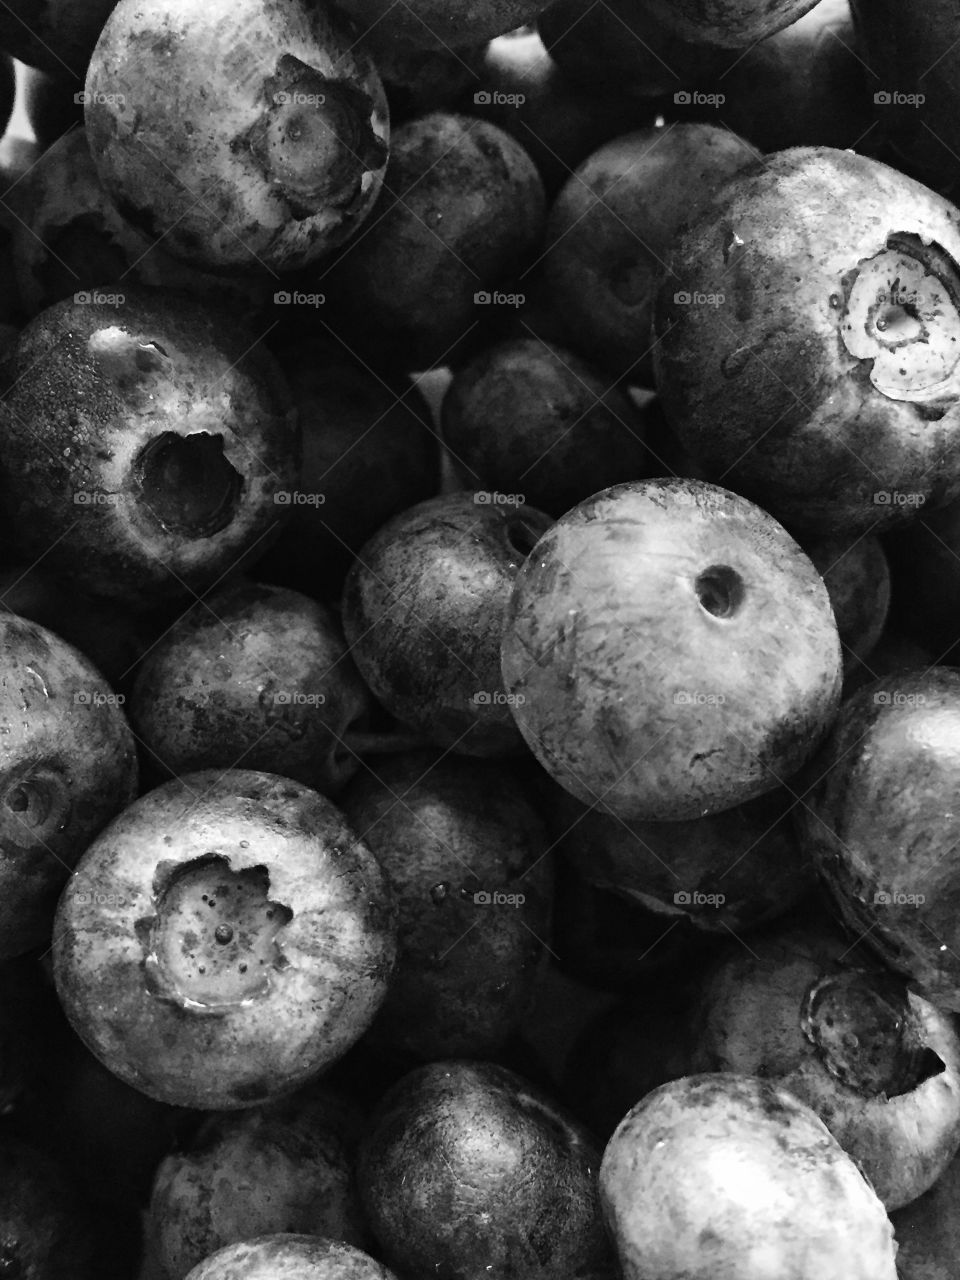 Blue berries in Black and white